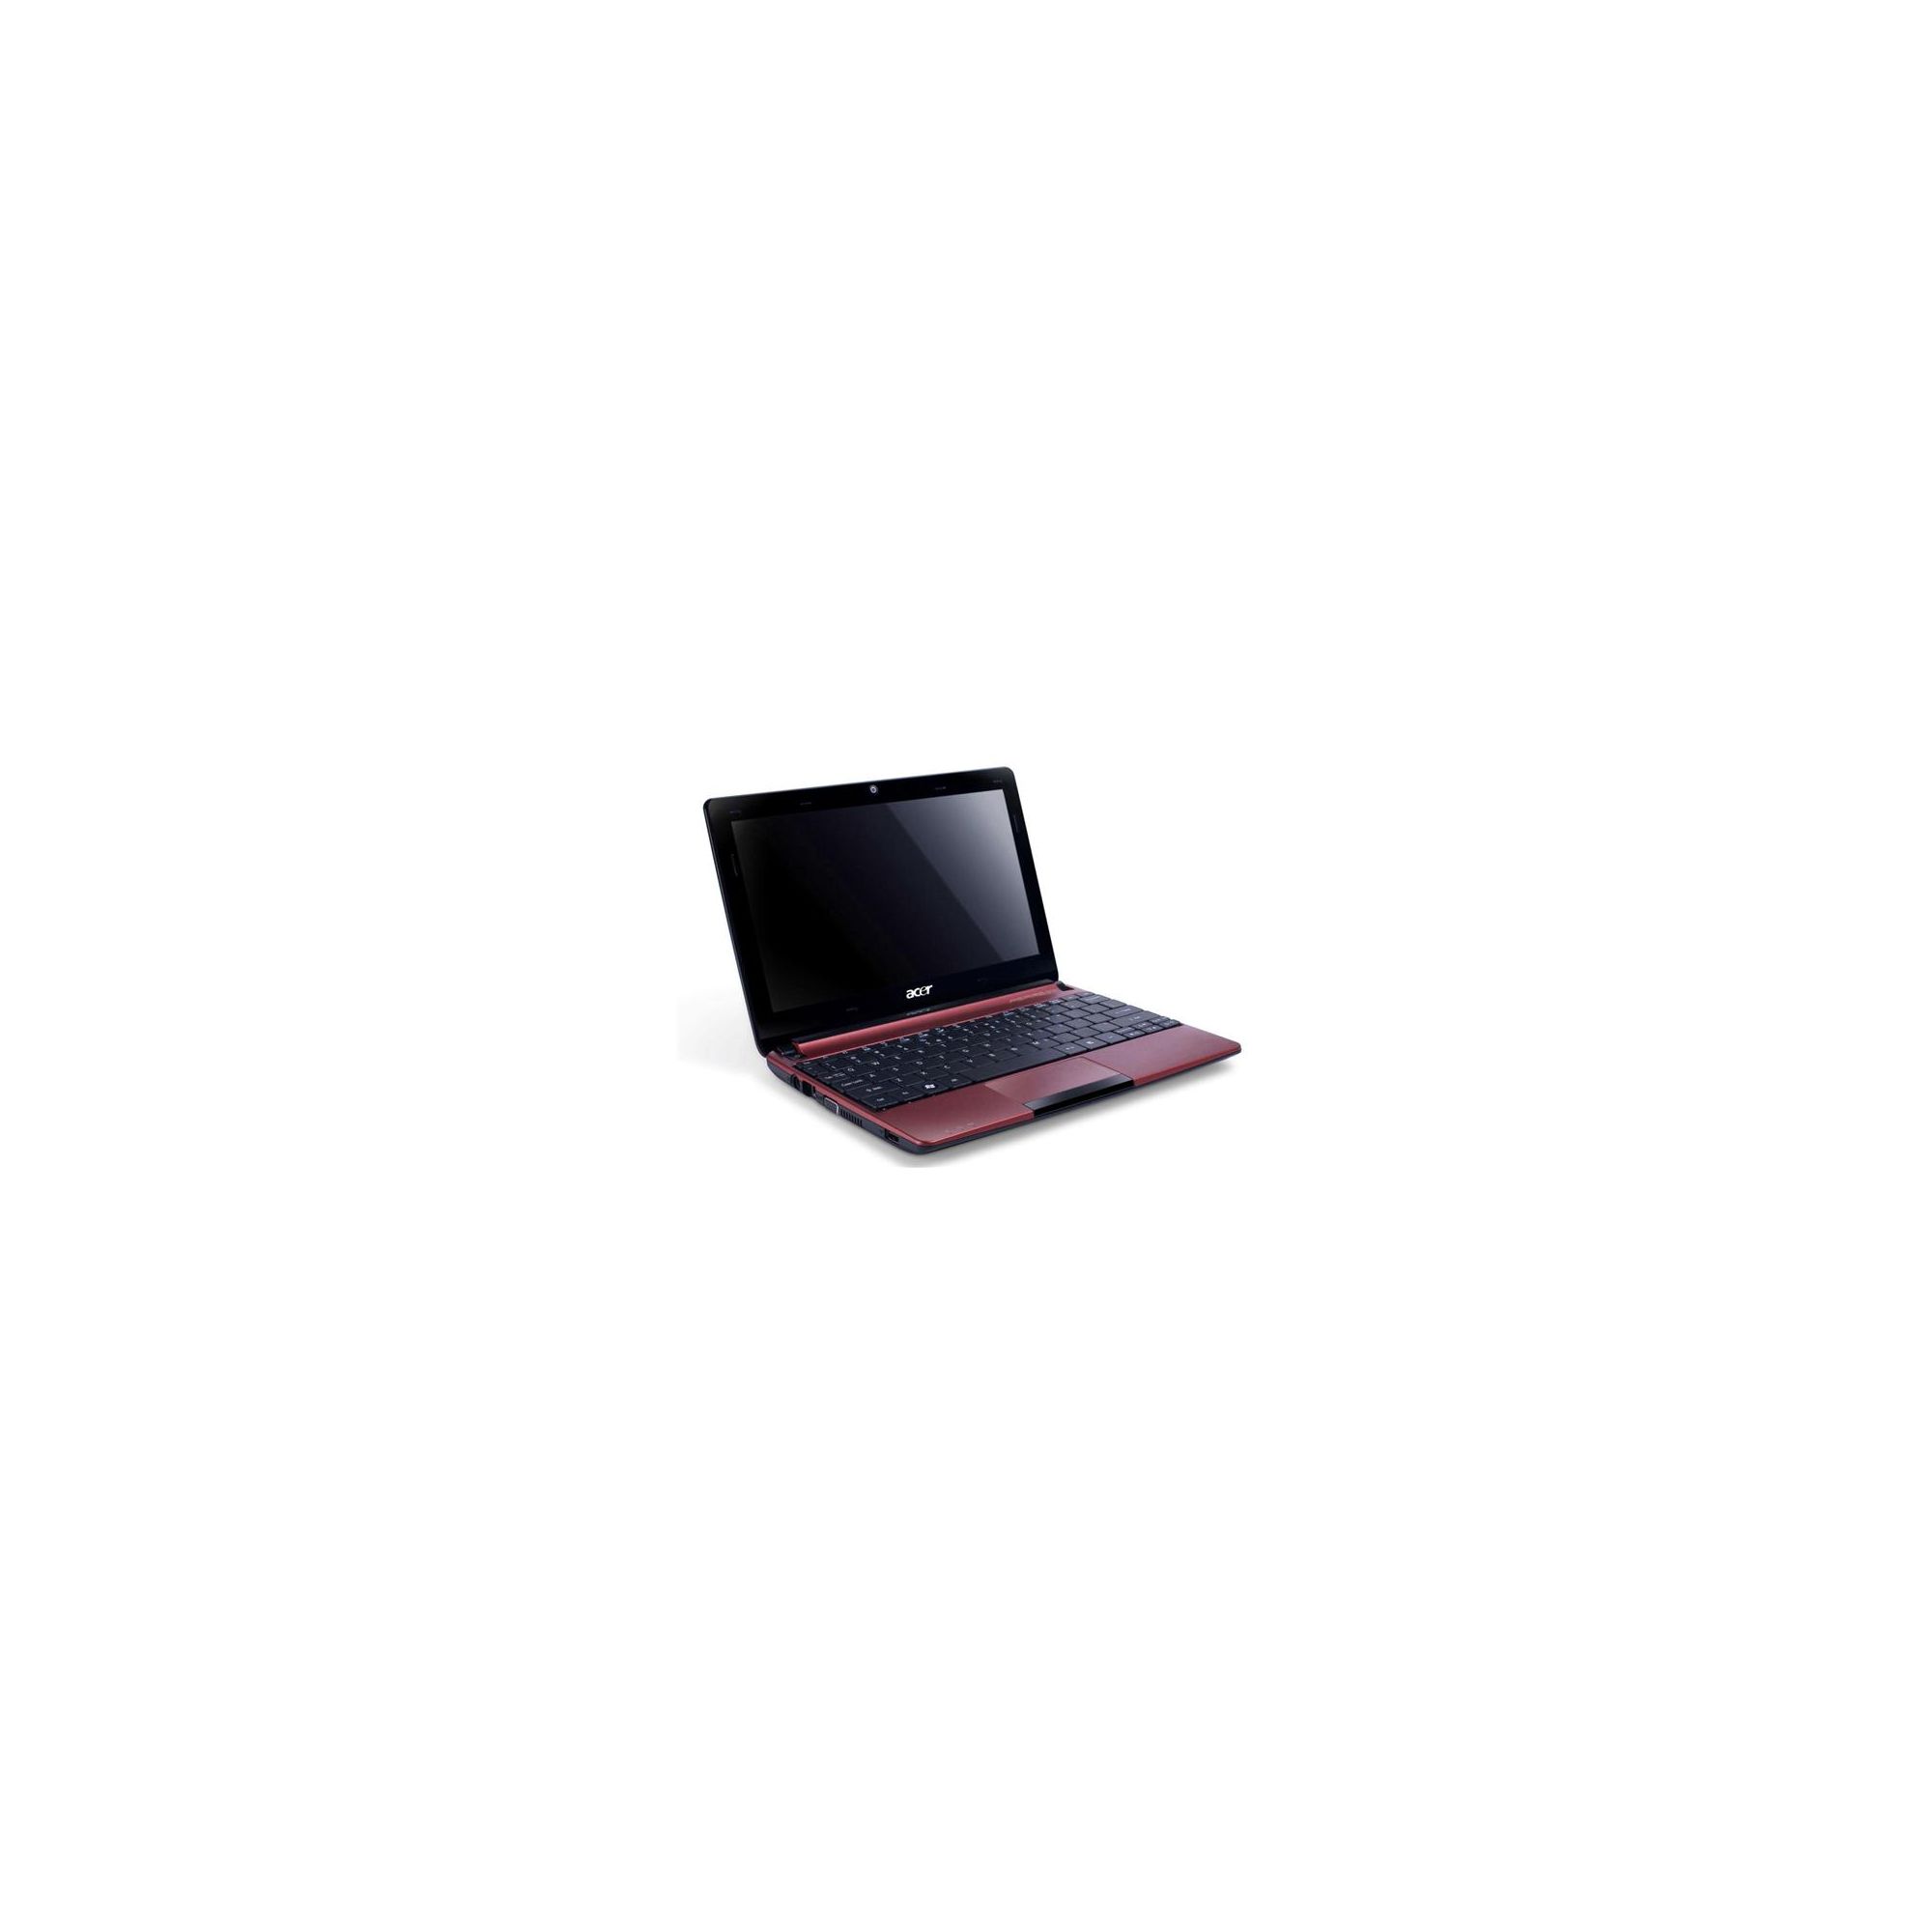 Acer Aspire One D257 Netbook (Intel Atom, 1GB, 250GB, 10.1'' Display) Red at Tescos Direct